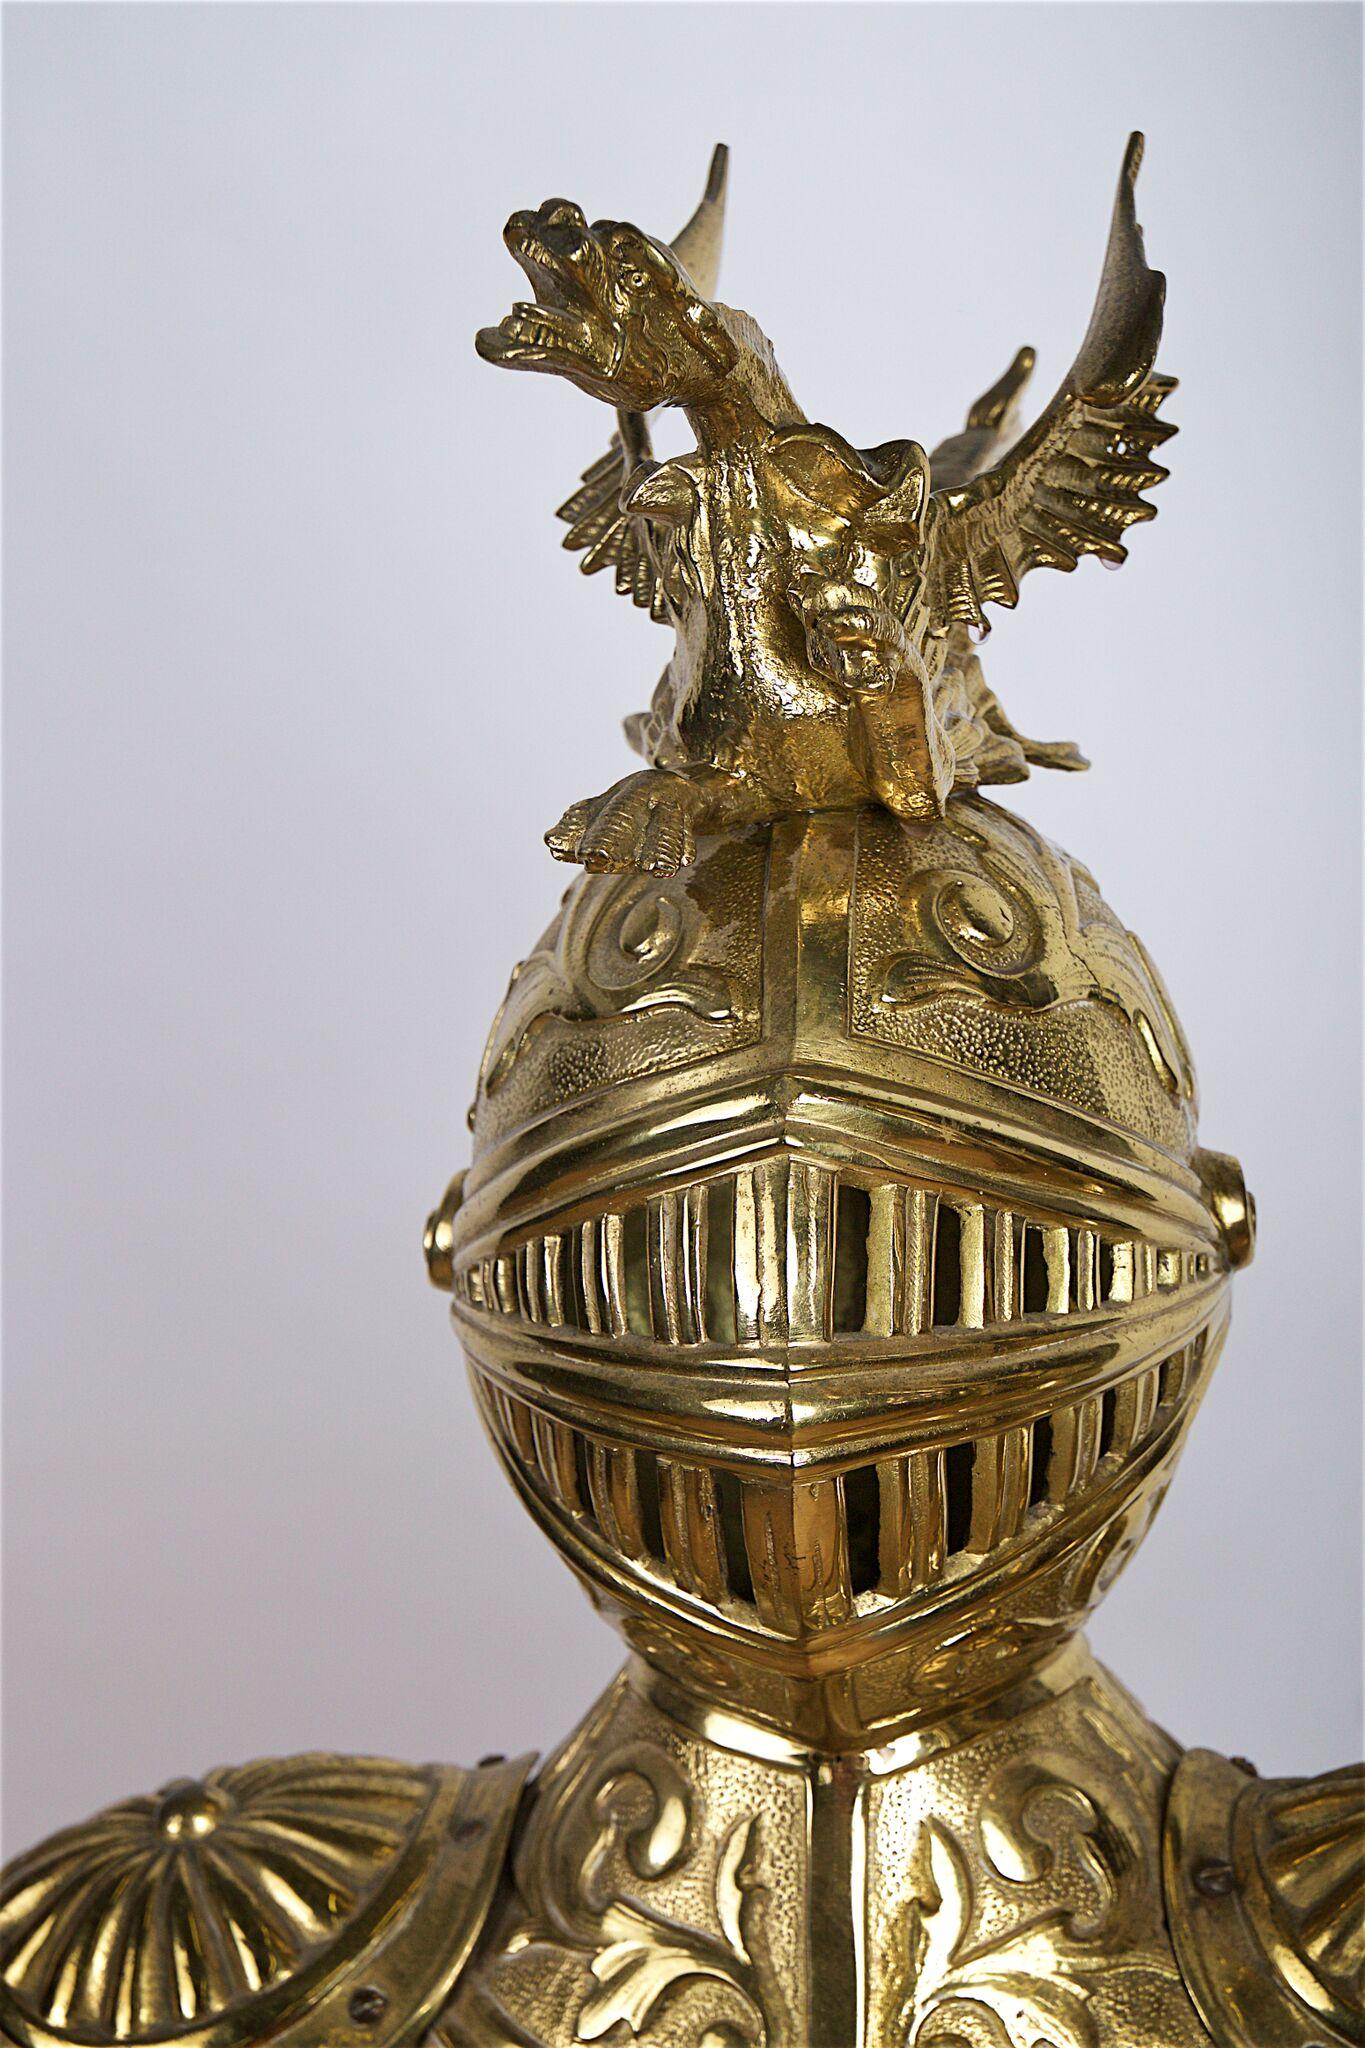 Late 19th century English decorative gilded bronze lamp in the form of a man in armour, on ebonised base with shield.